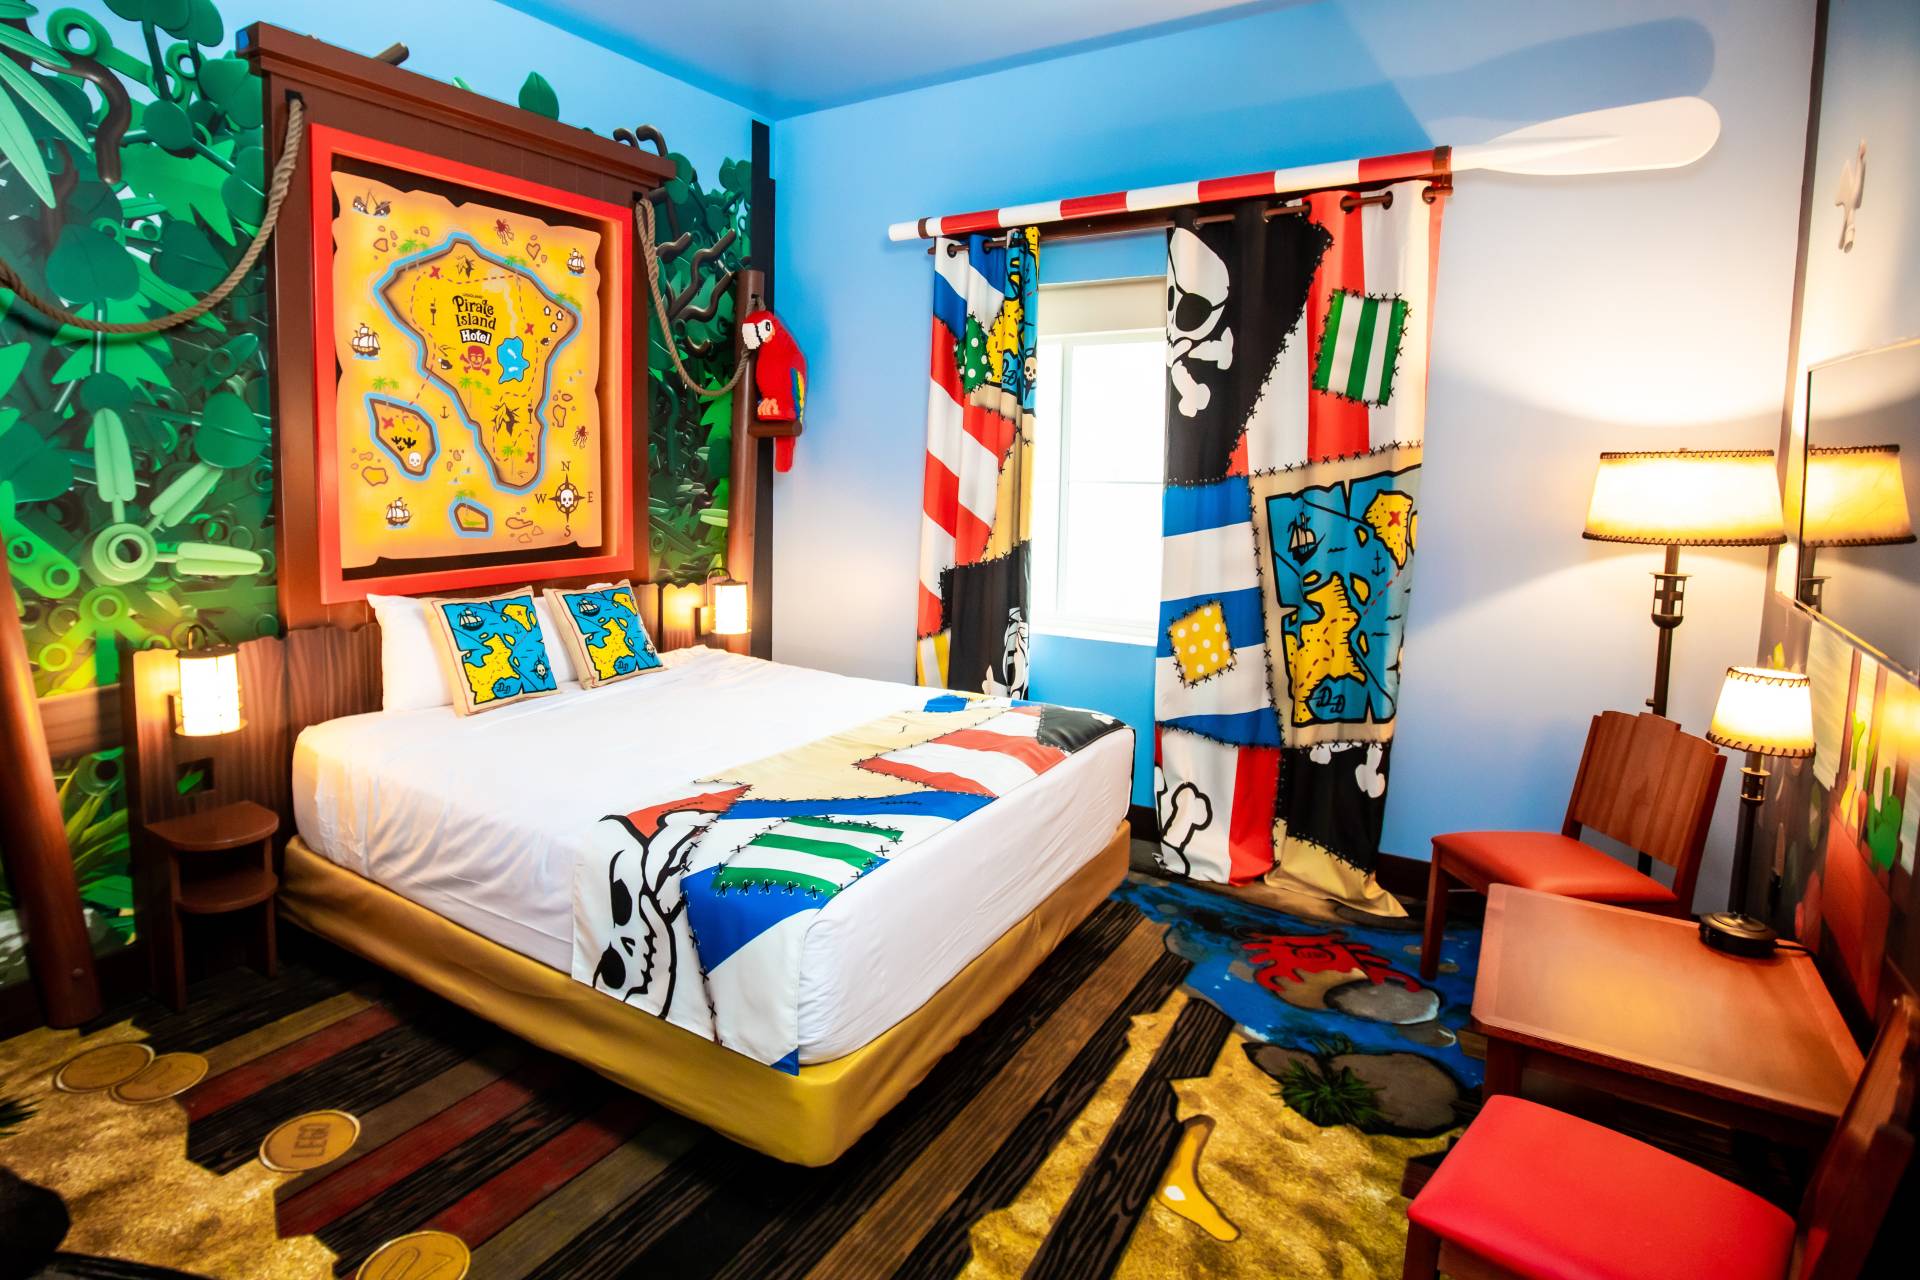 Adult sleeping area in a themed room at Pirate Island Hotel